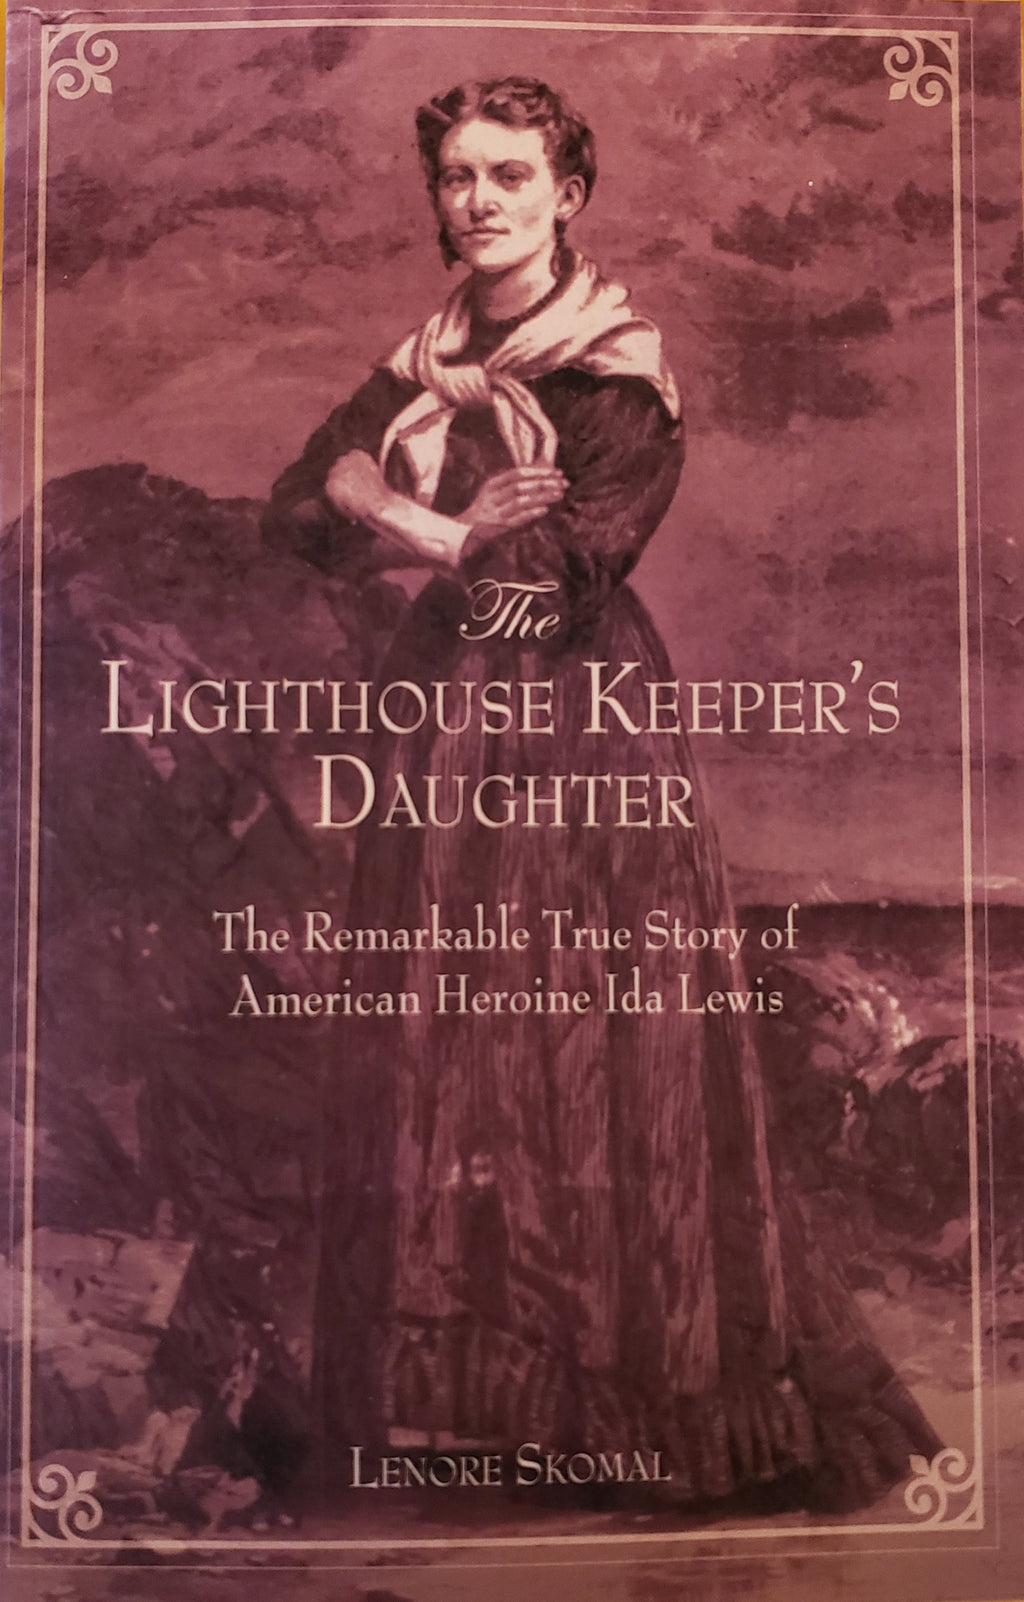 The Lighthouse Keeper's Daughter by Lenore Skomal